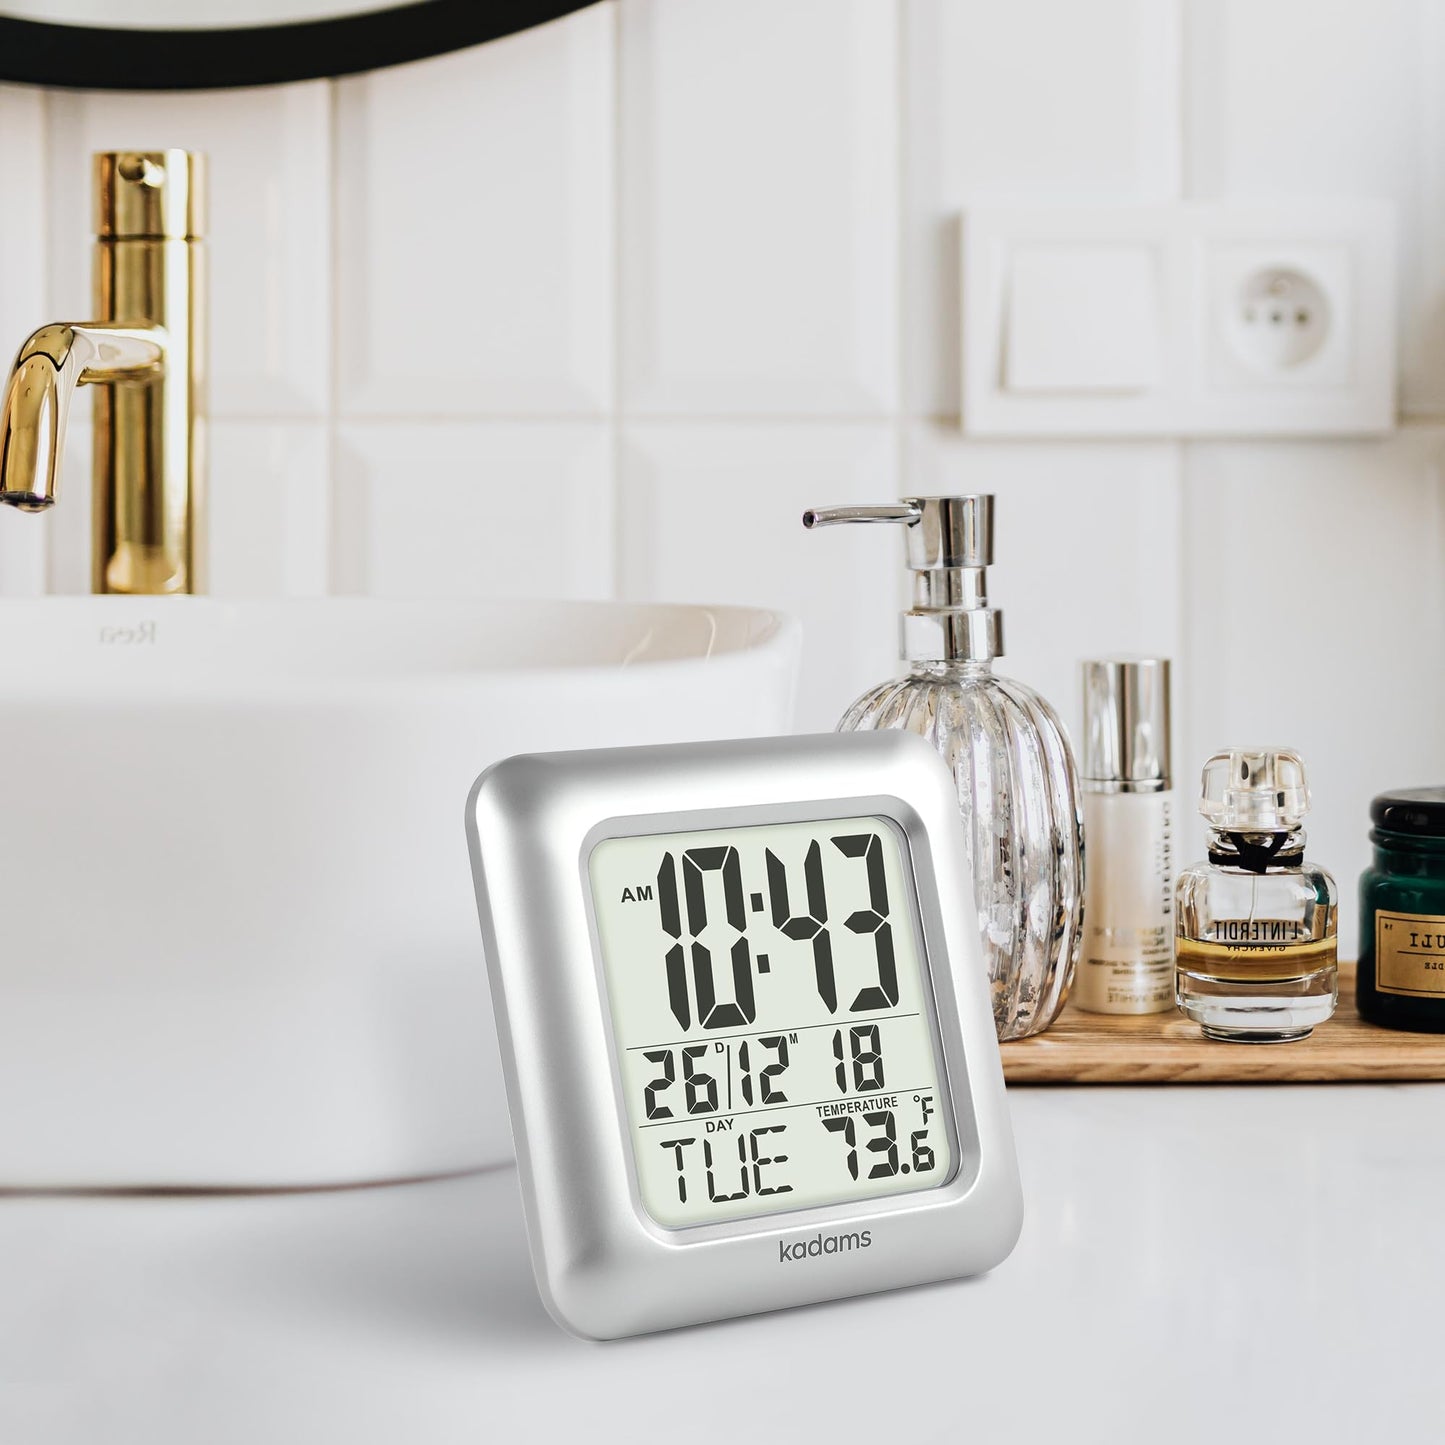 KADAMS Bathroom Shower Digital Wall Clock - Water Resistant - Large Display LED Wall Clock - Seconds Counter - Temperature & Calendar Display - Suction Cup, Multiple Mounting Options (Silver)